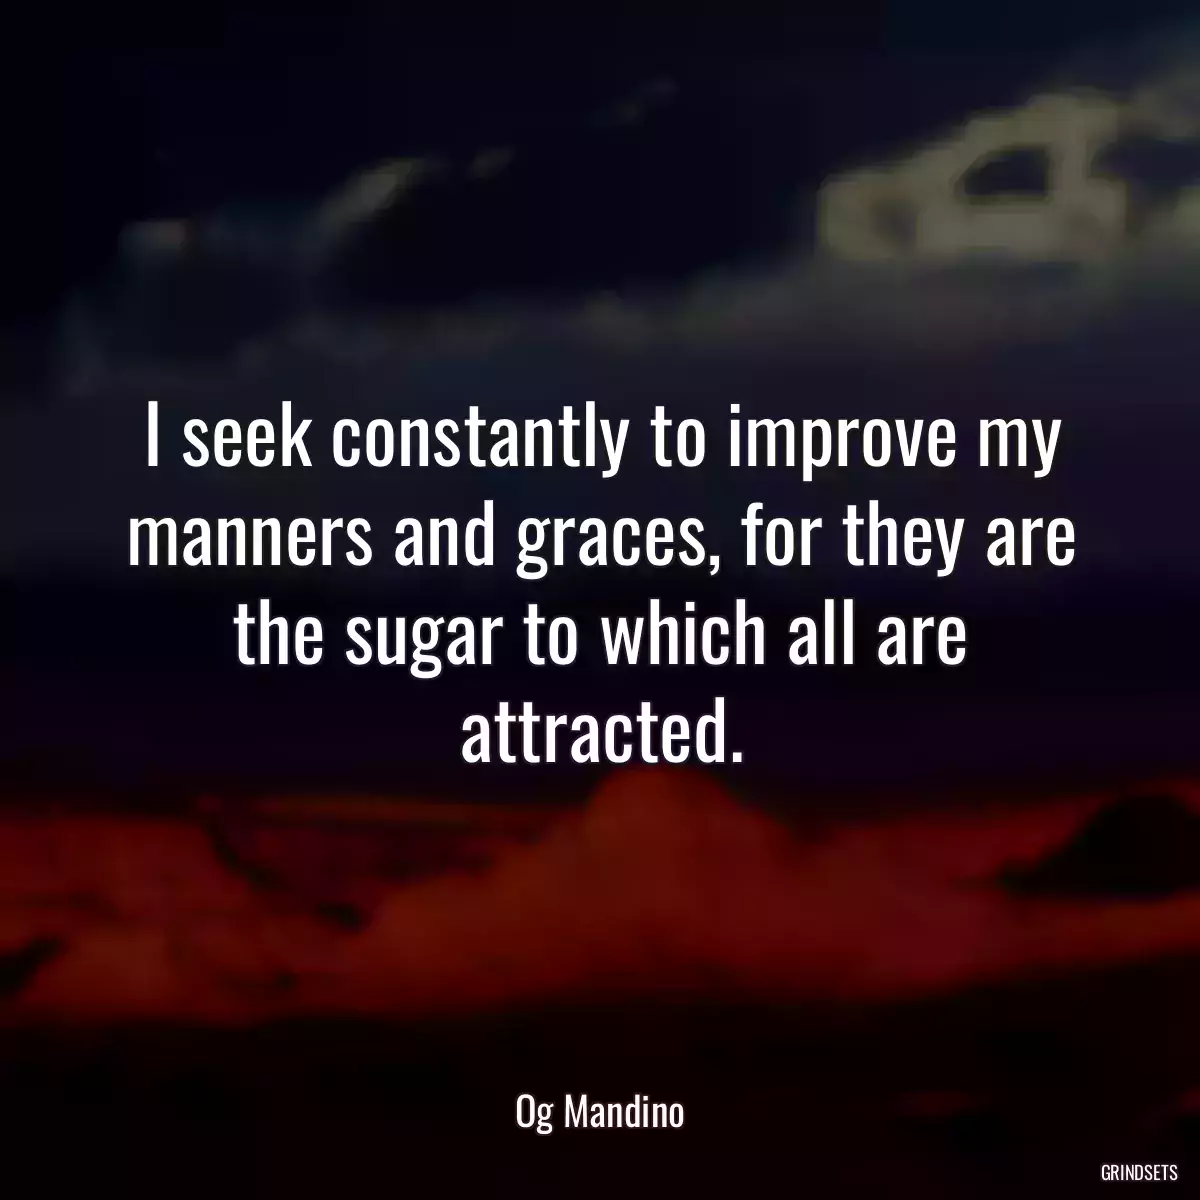 I seek constantly to improve my manners and graces, for they are the sugar to which all are attracted.